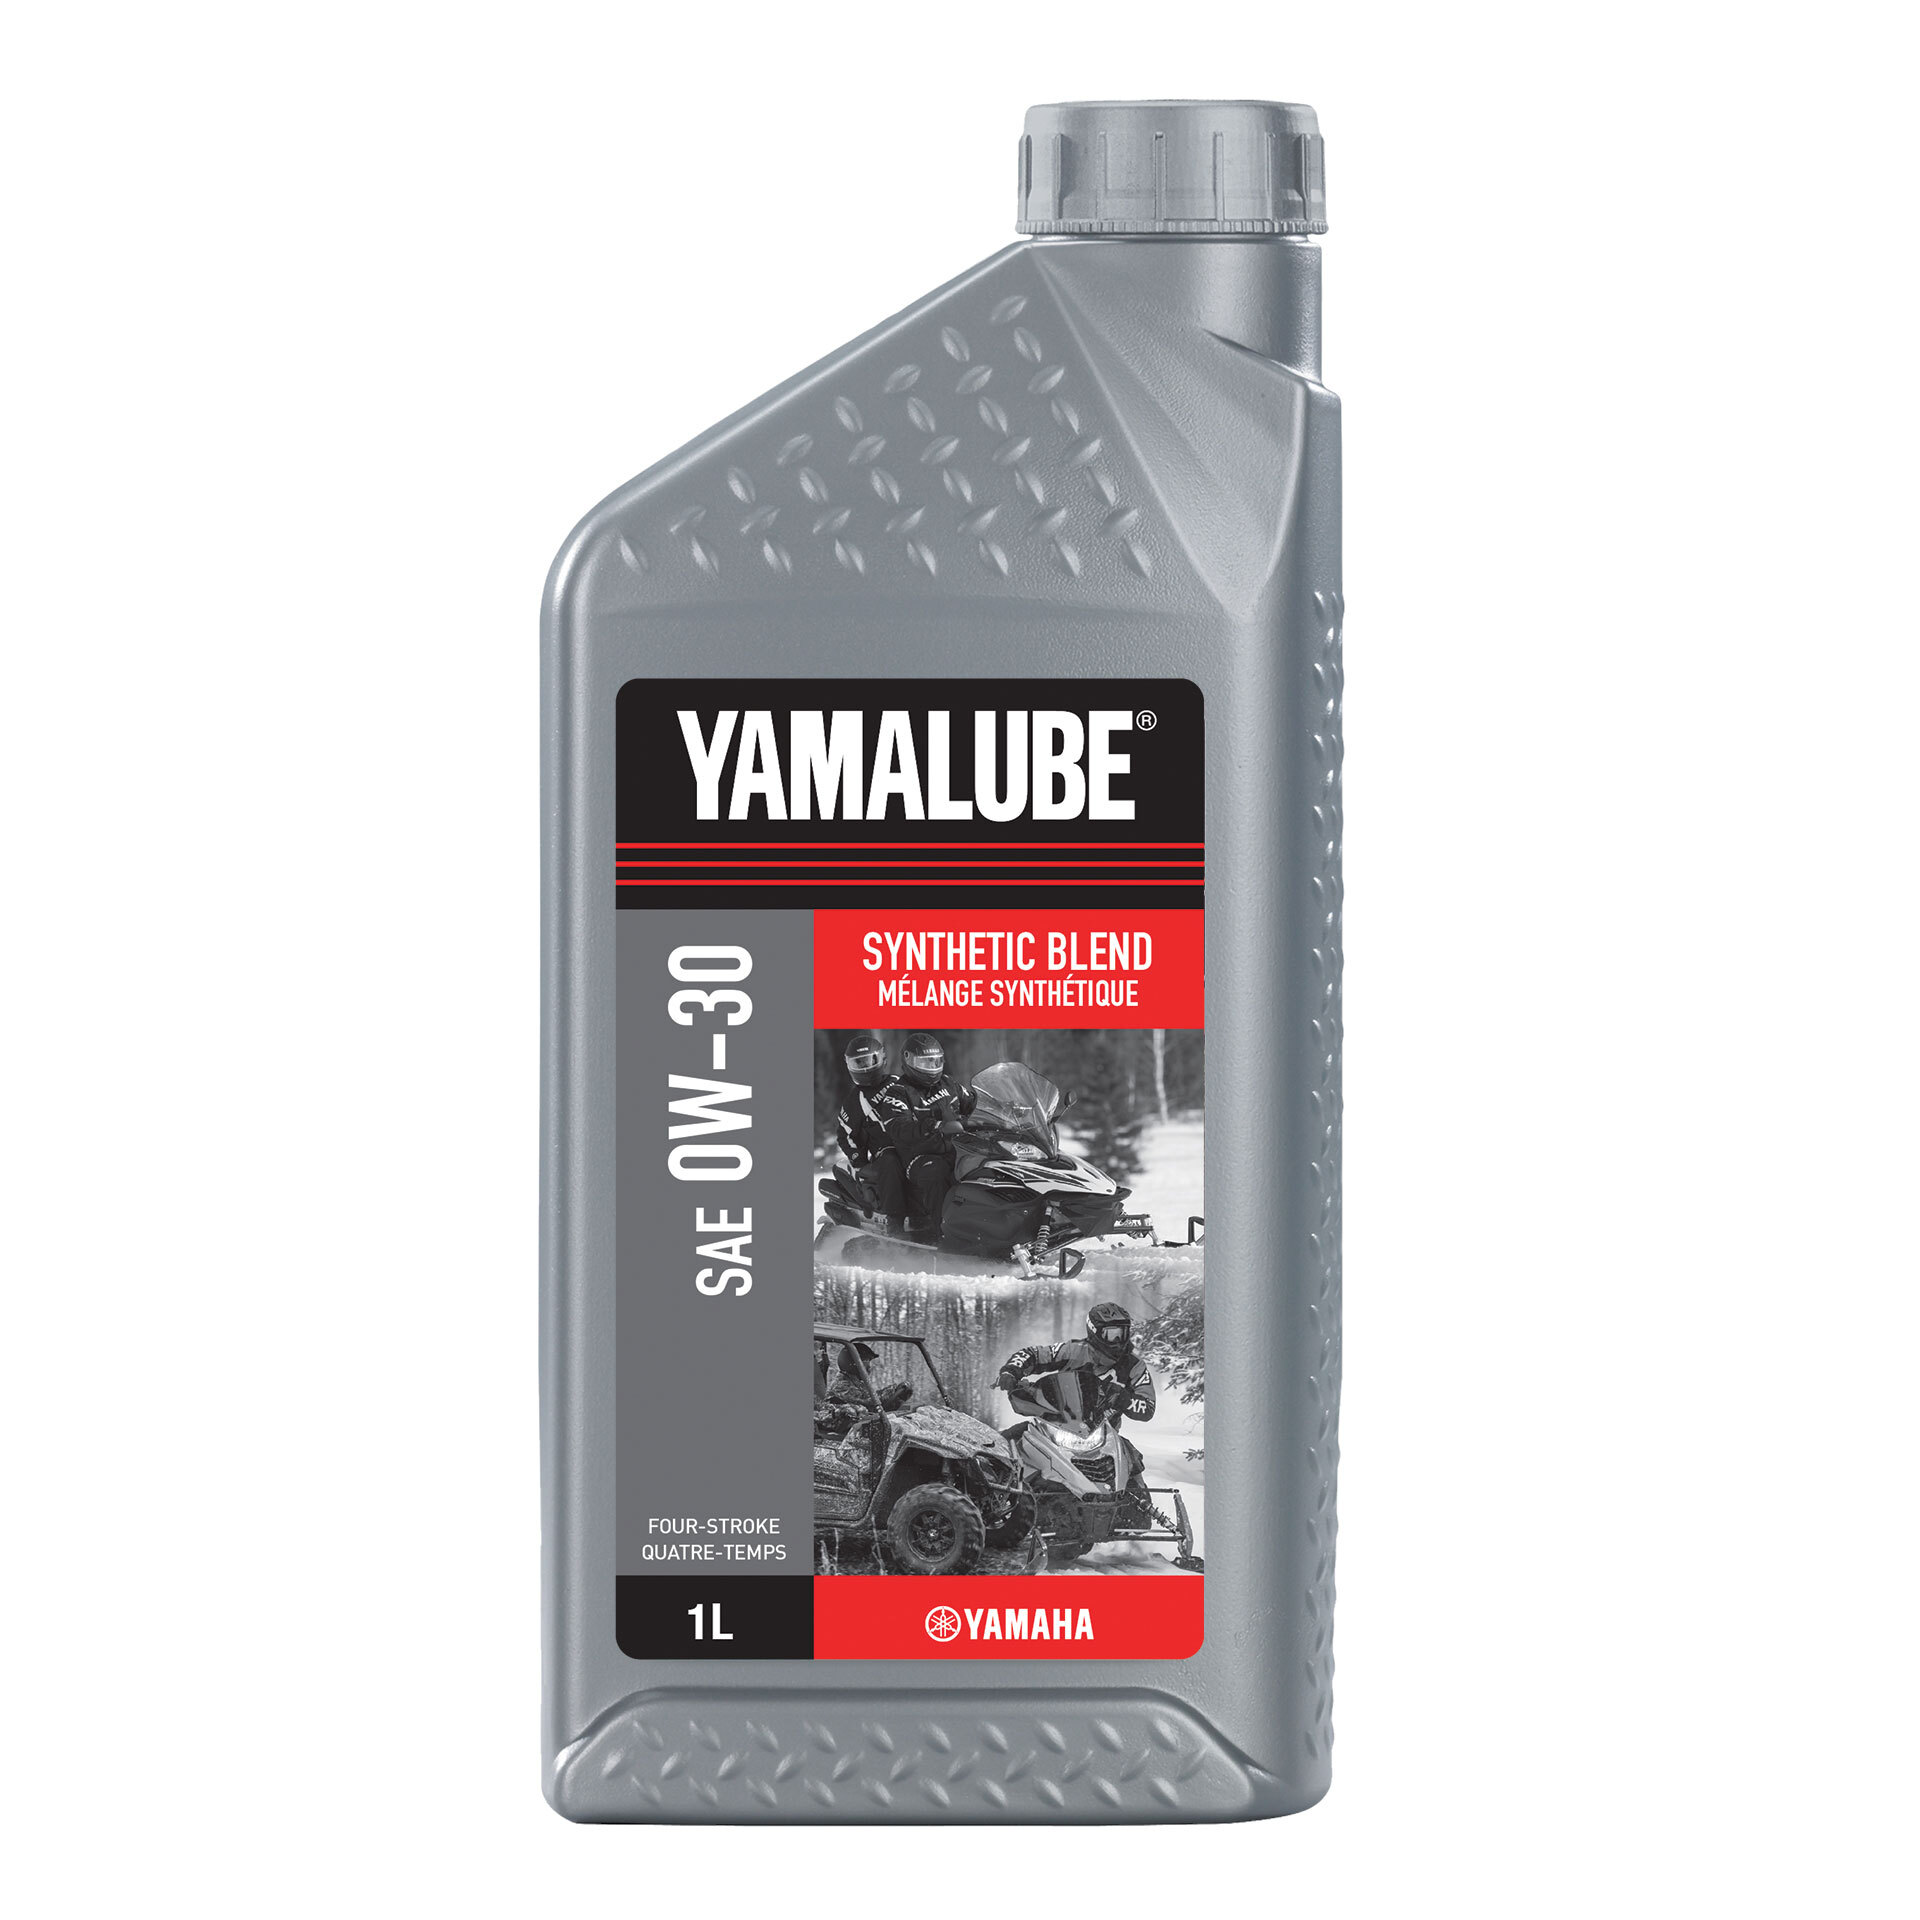 Yamalube® 0W 30 Synthetic Blend Engine Oil